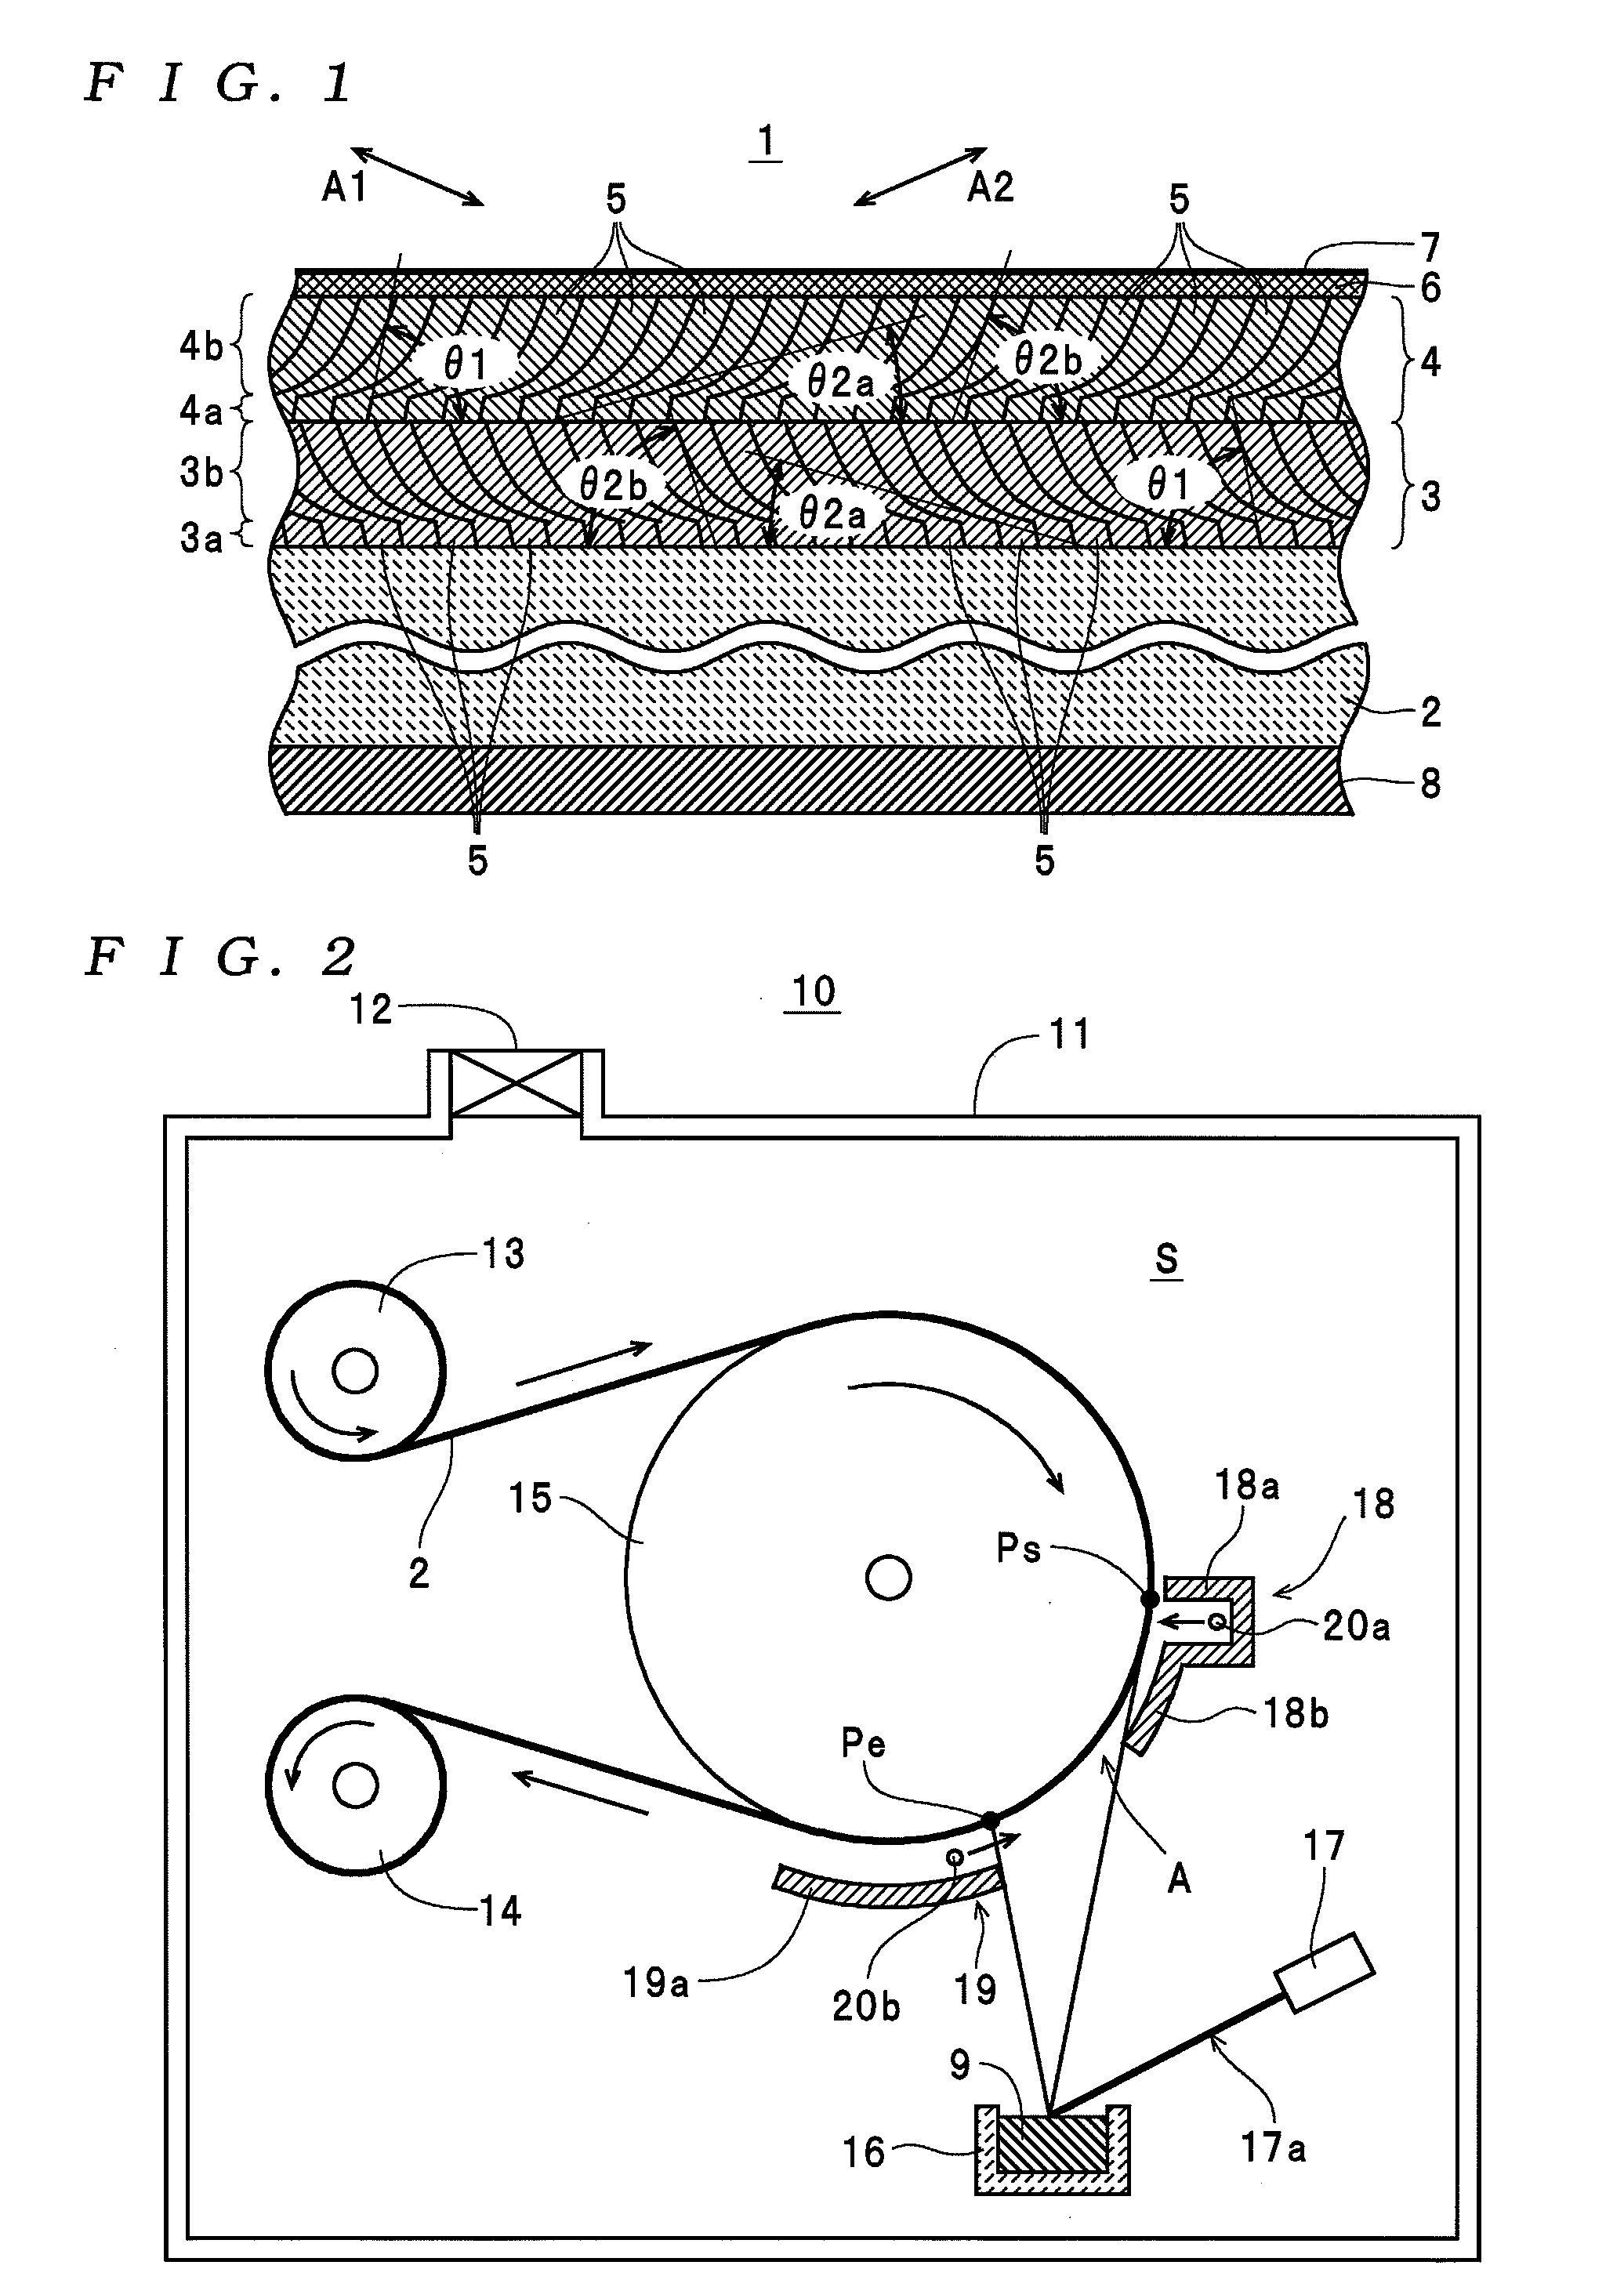 Magnetic recording medium, magnetic recording medium manufacturing apparatus, and method of manufacturing a magnetic recording medium